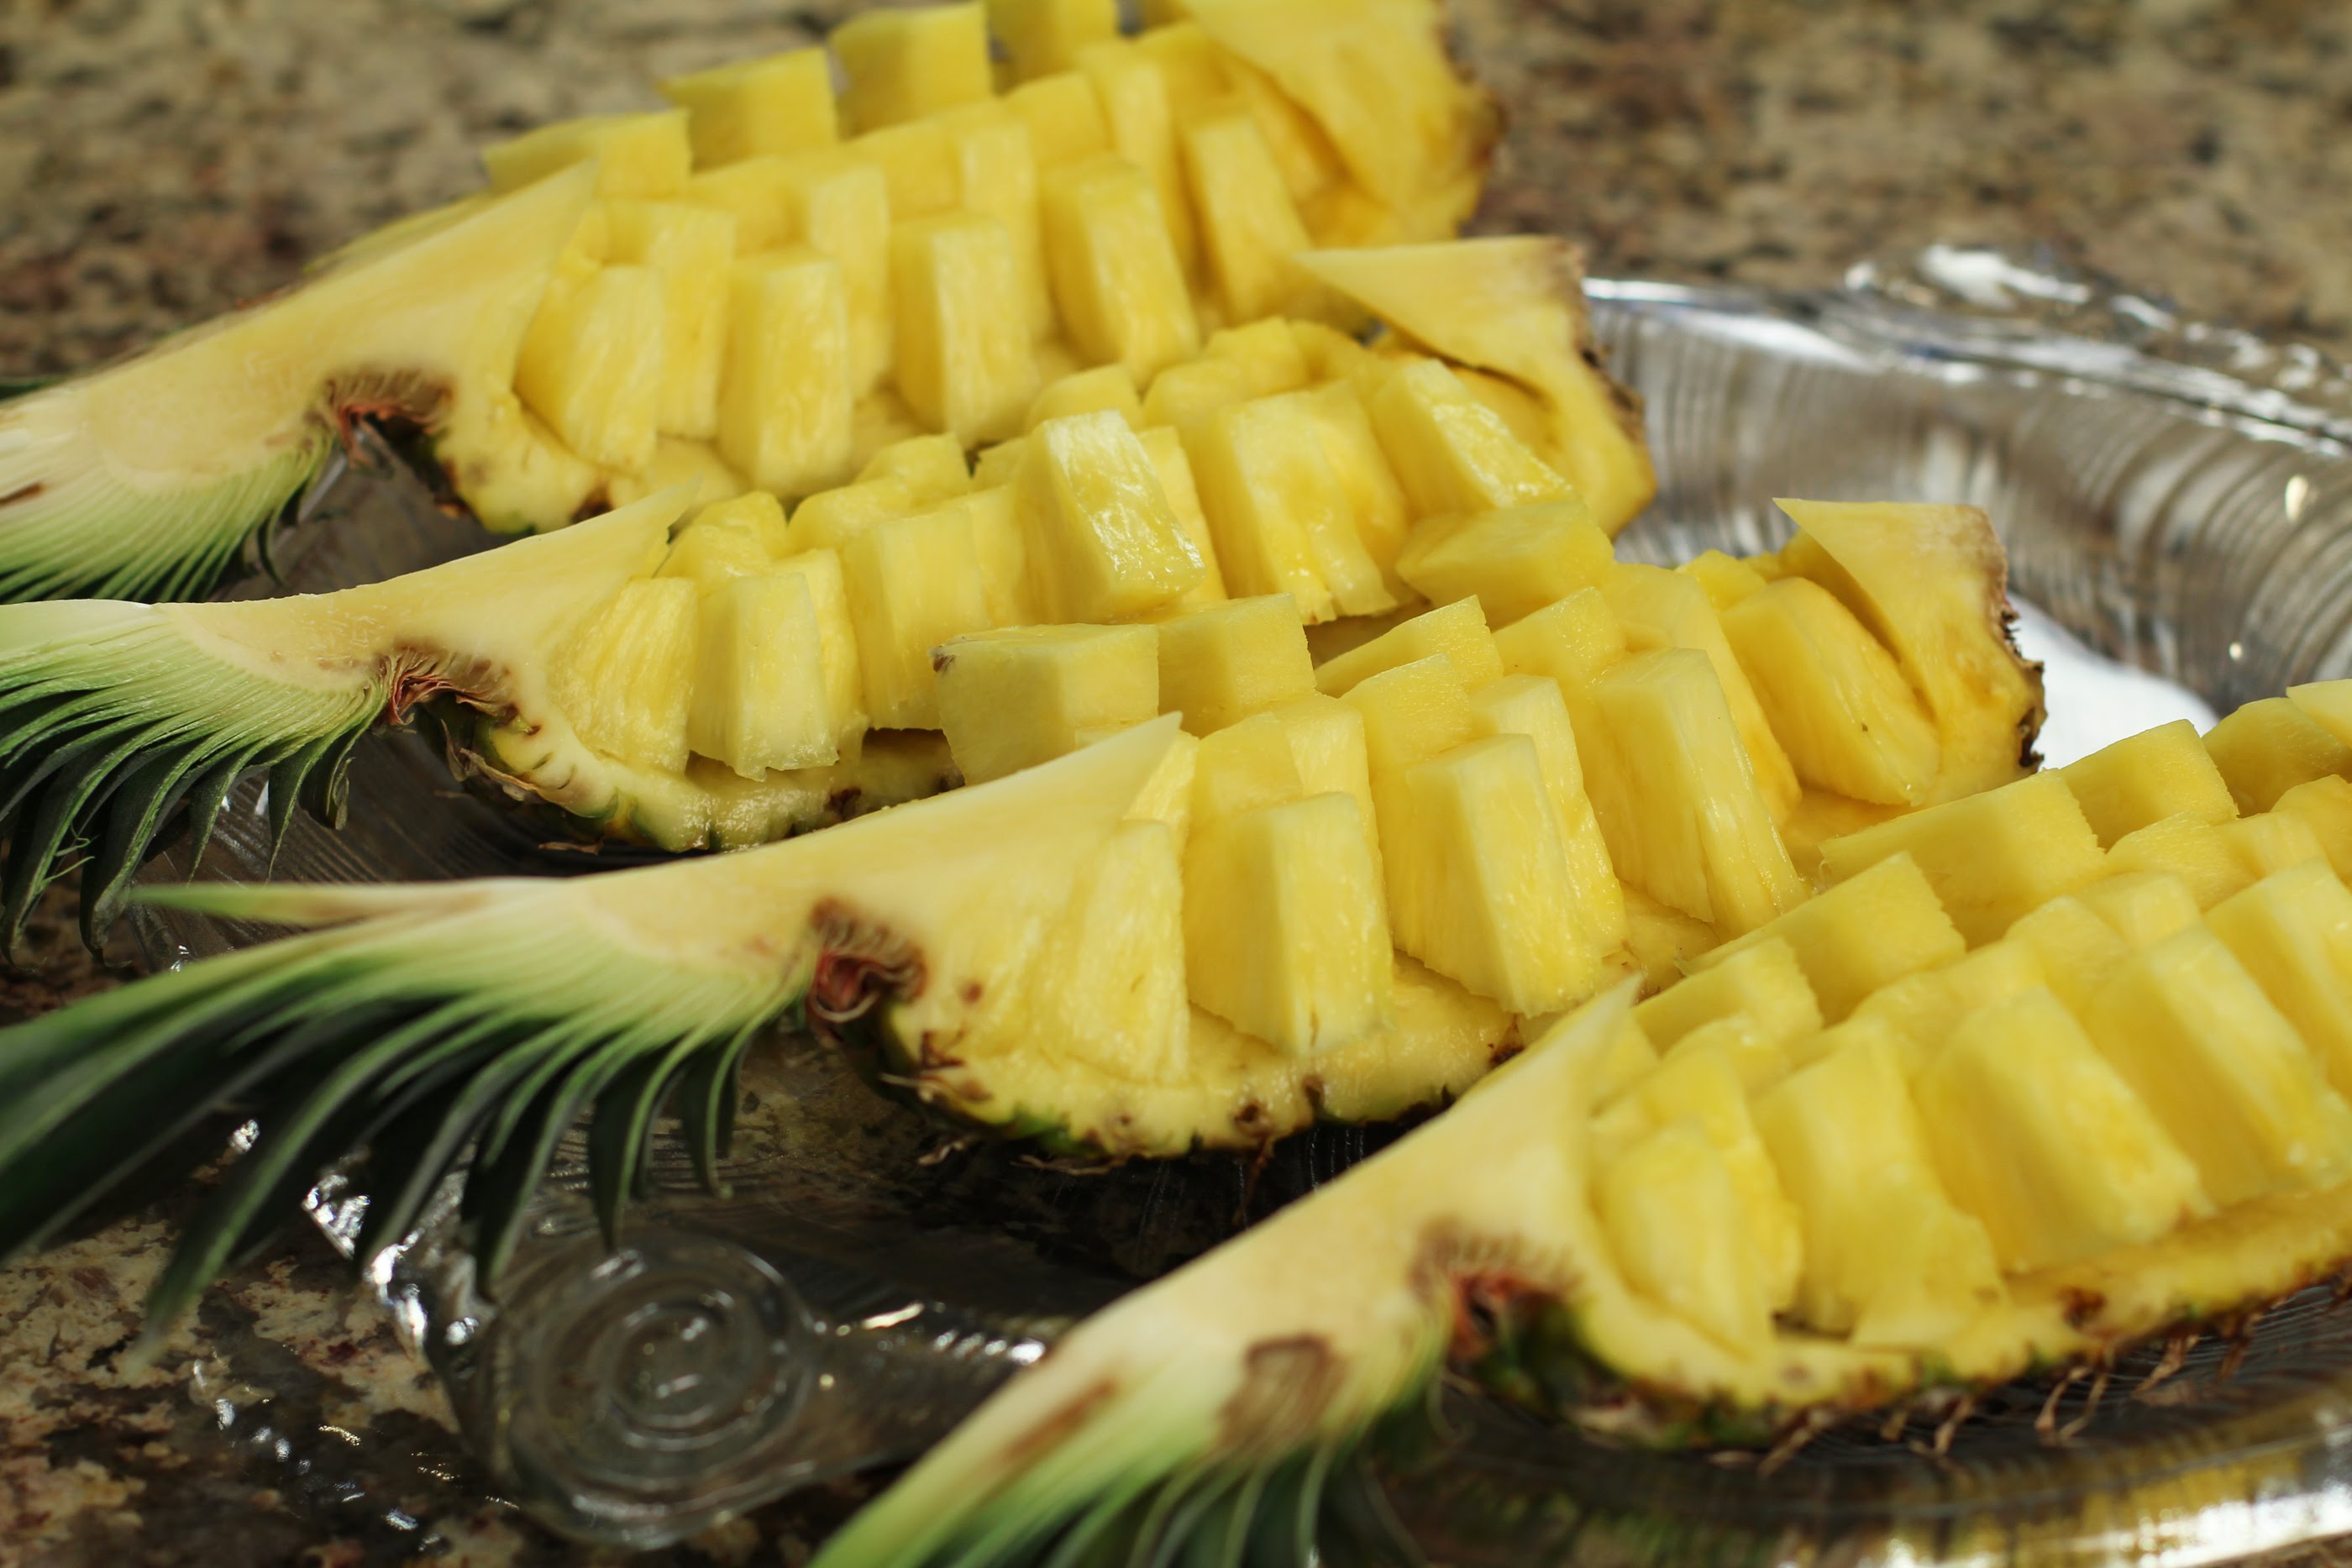 How To Cut A Pineapple Fruit Display Easily In 6 min. by Rockin ...